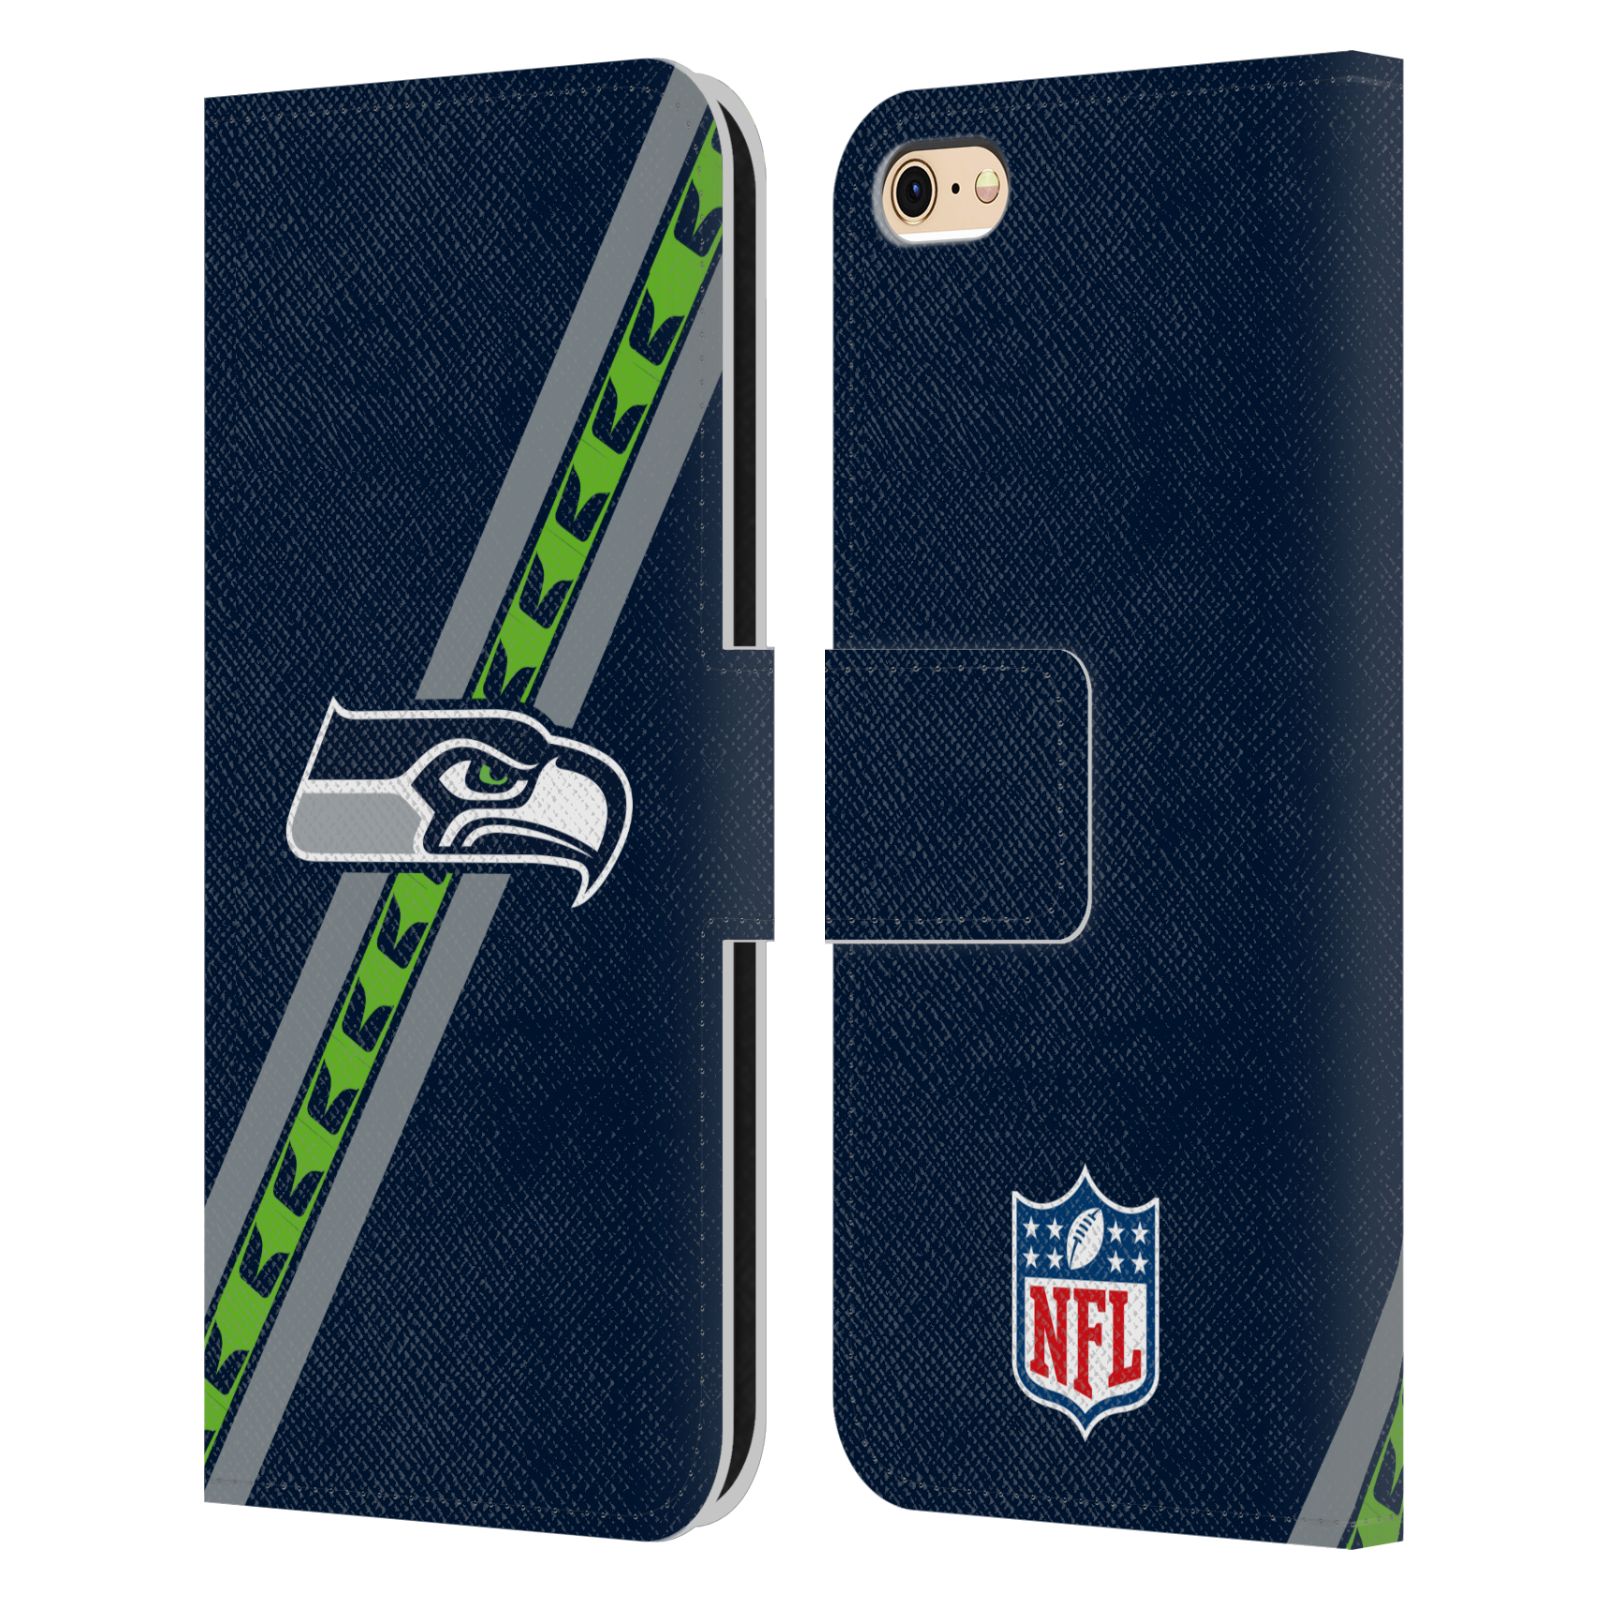 OFFICIAL NFL SEATTLE SEAHAWKS LOGO LEATHER BOOK CASE FOR APPLE iPHONE